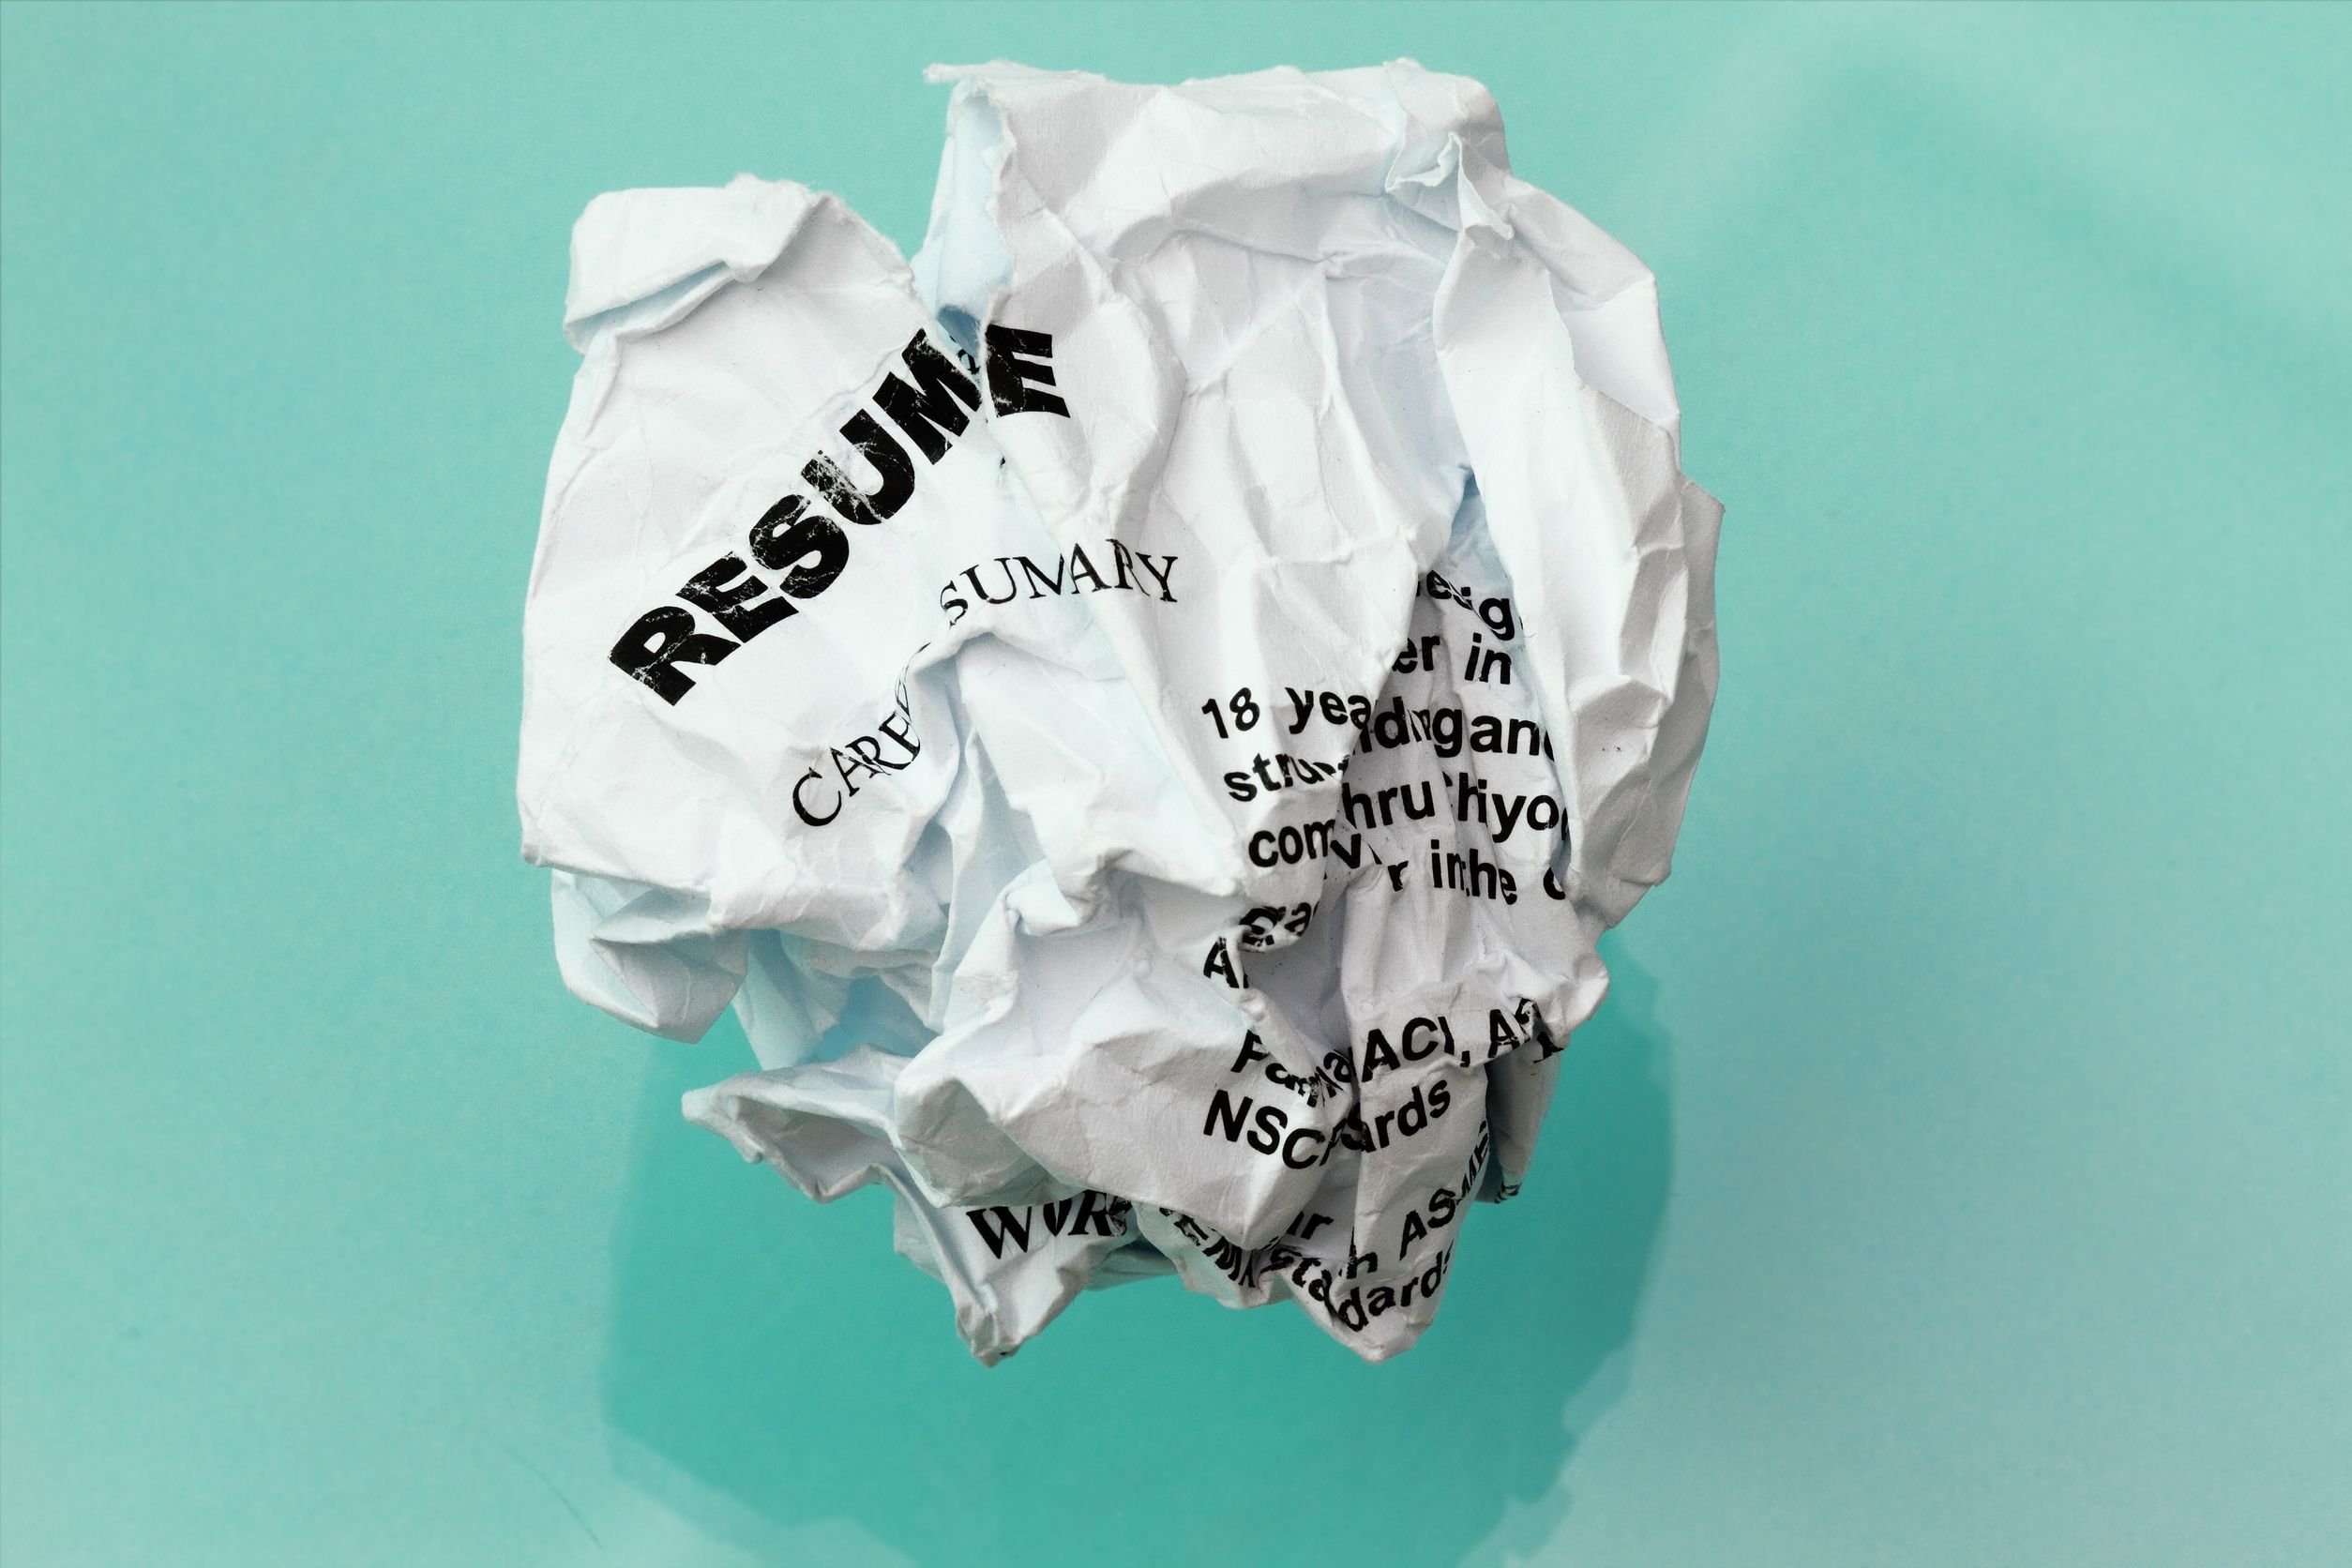 5 Tips to Beef up Your Resume